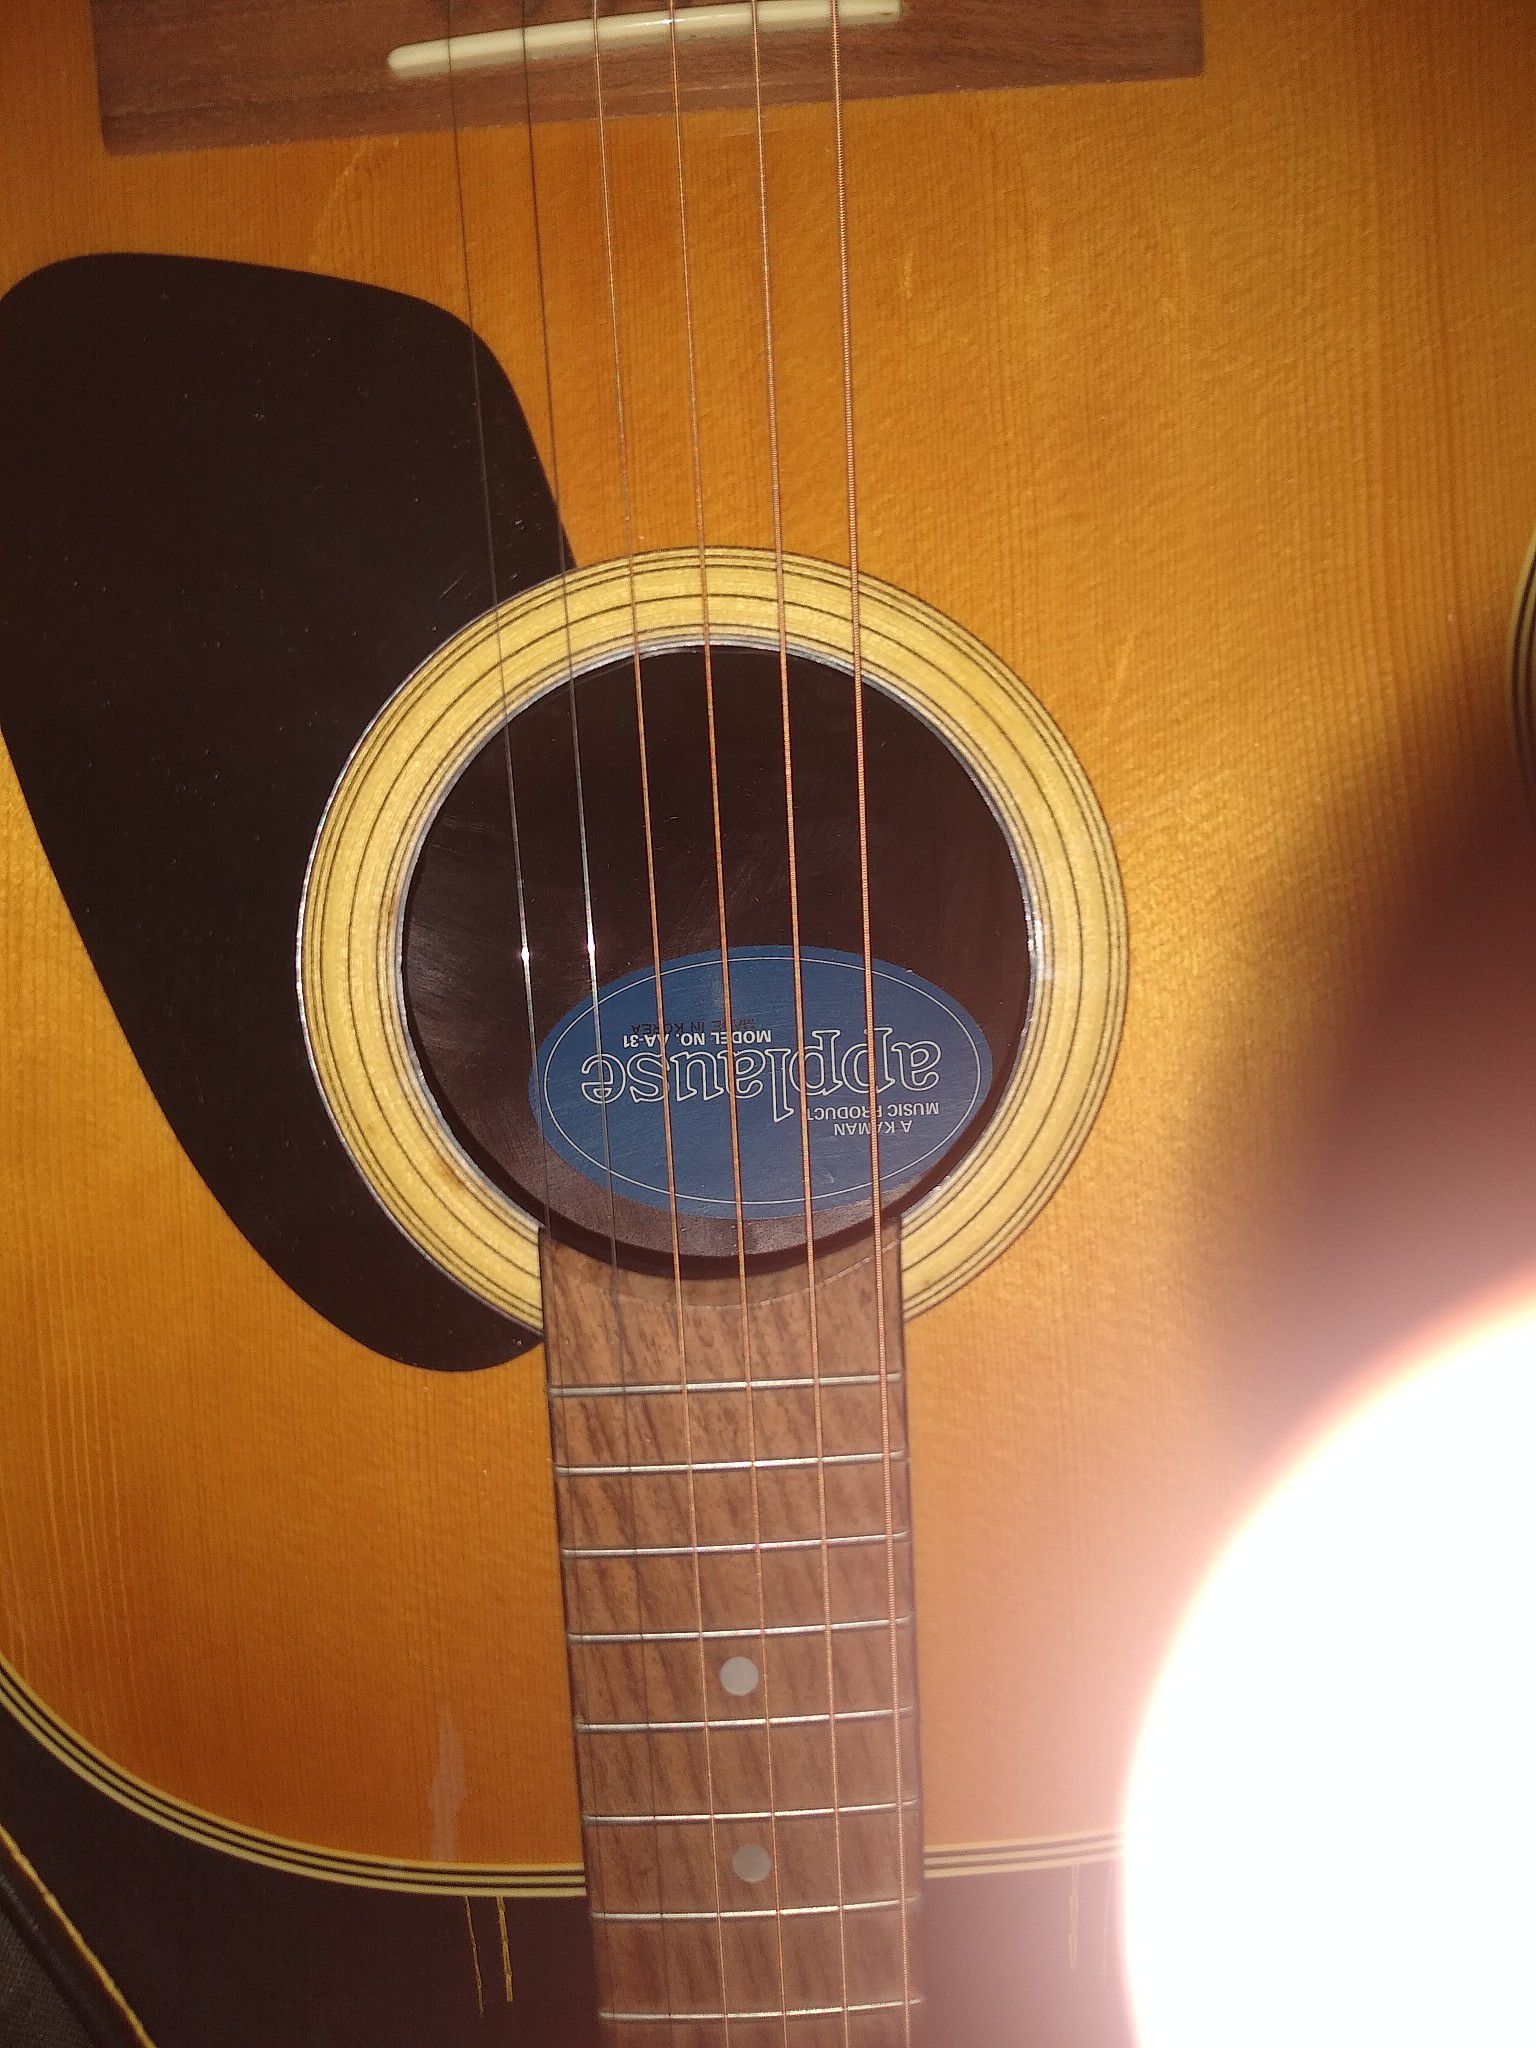 applause acoustic guitar